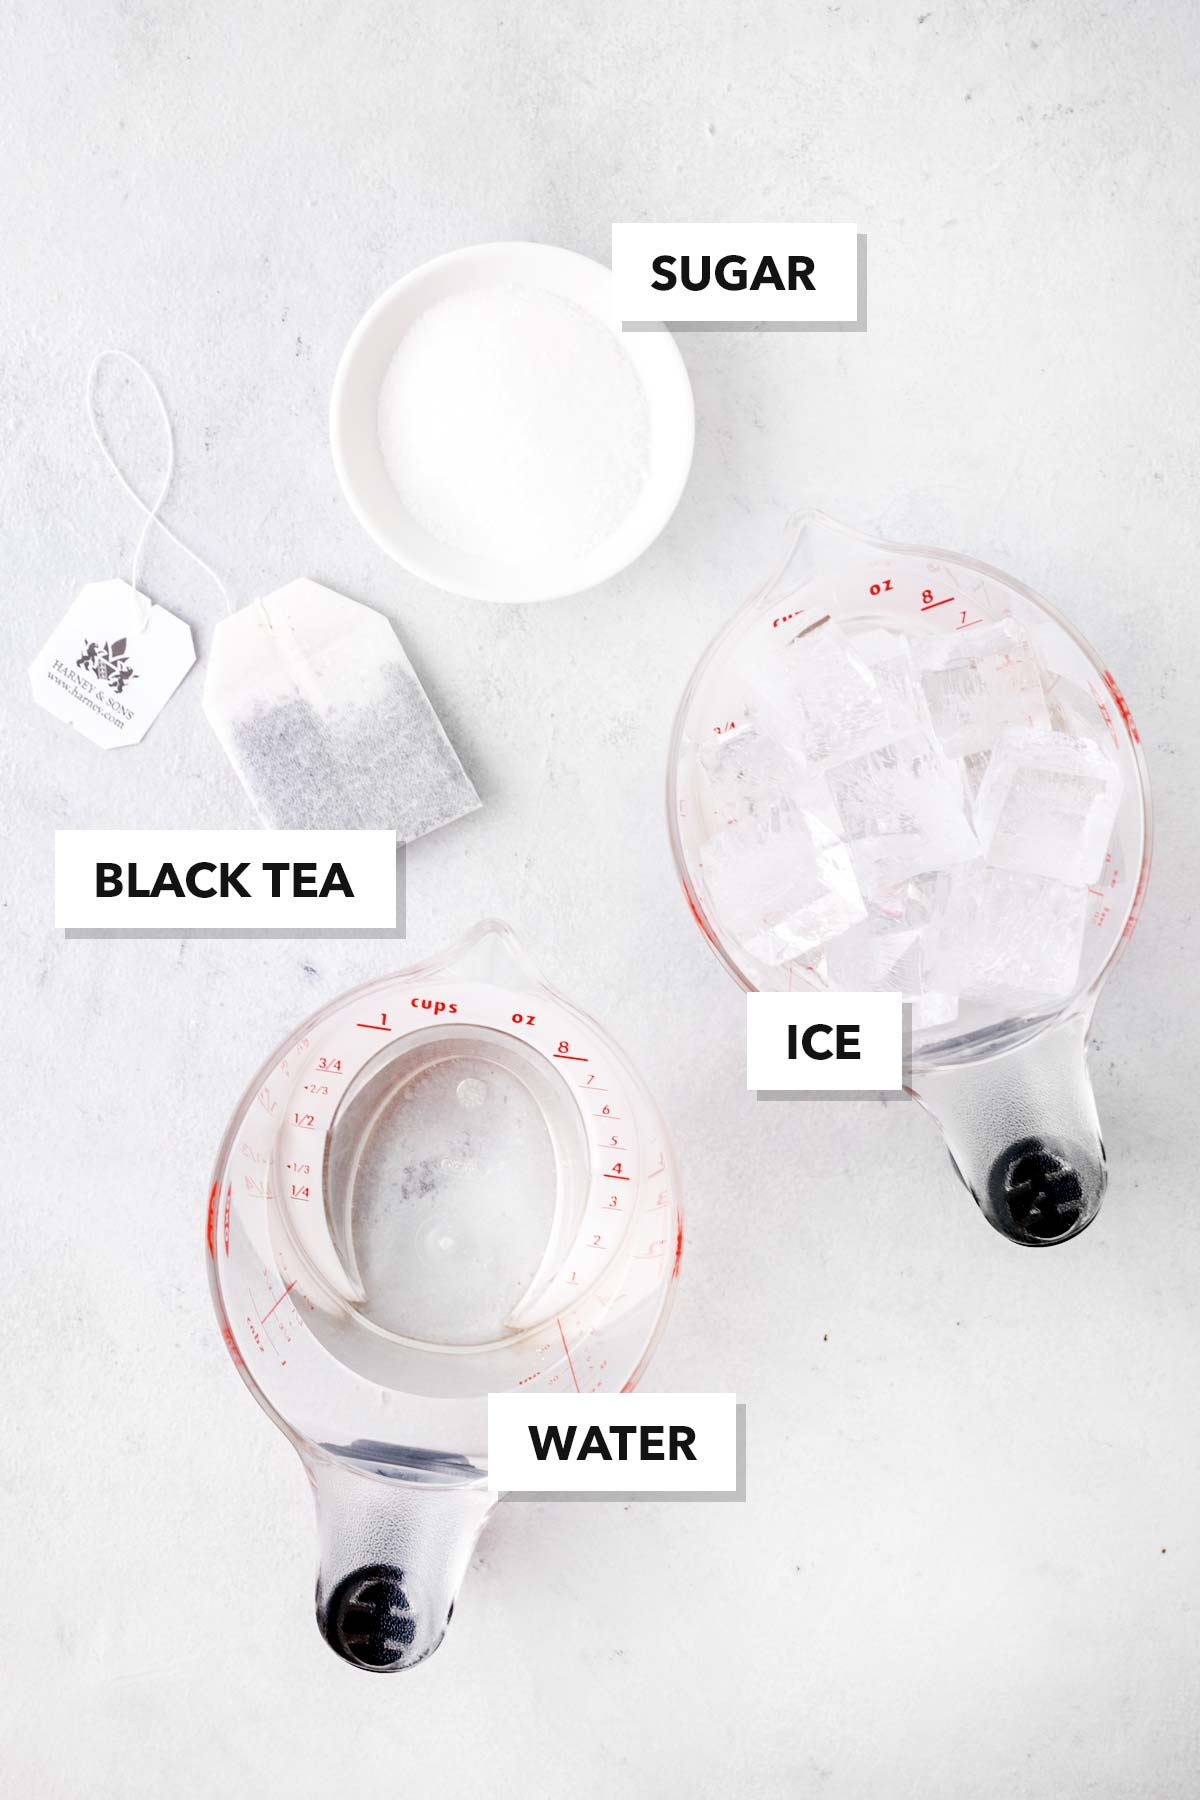 Black Iced Tea ingredients, labeled, on a white tabletop.